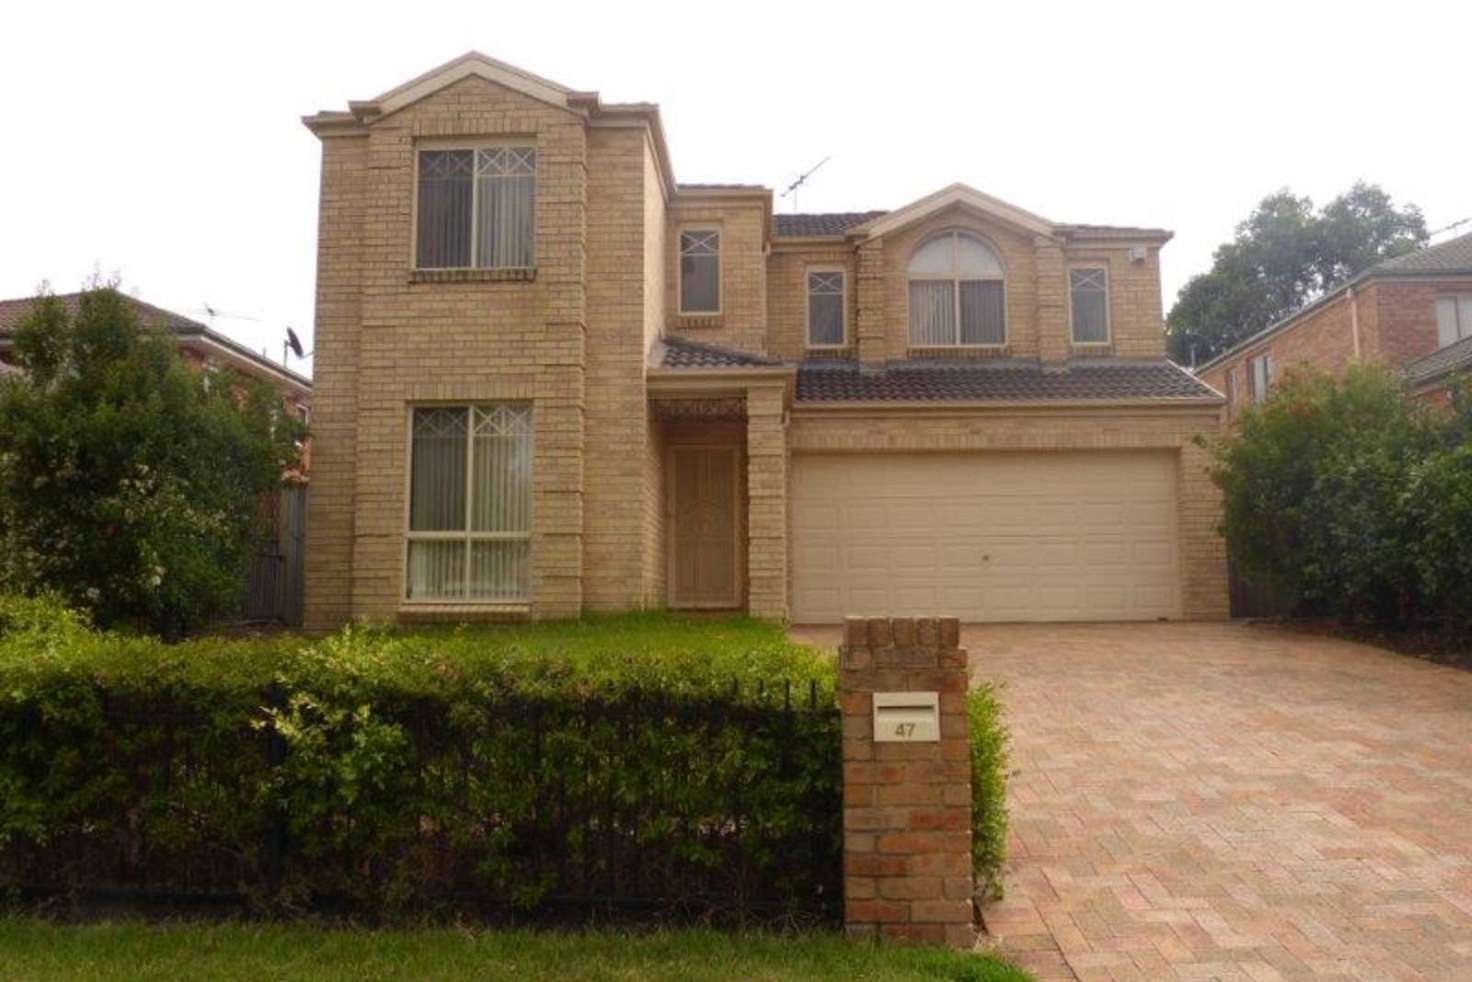 Main view of Homely house listing, 47 Greendale Terrace, Quakers Hill NSW 2763